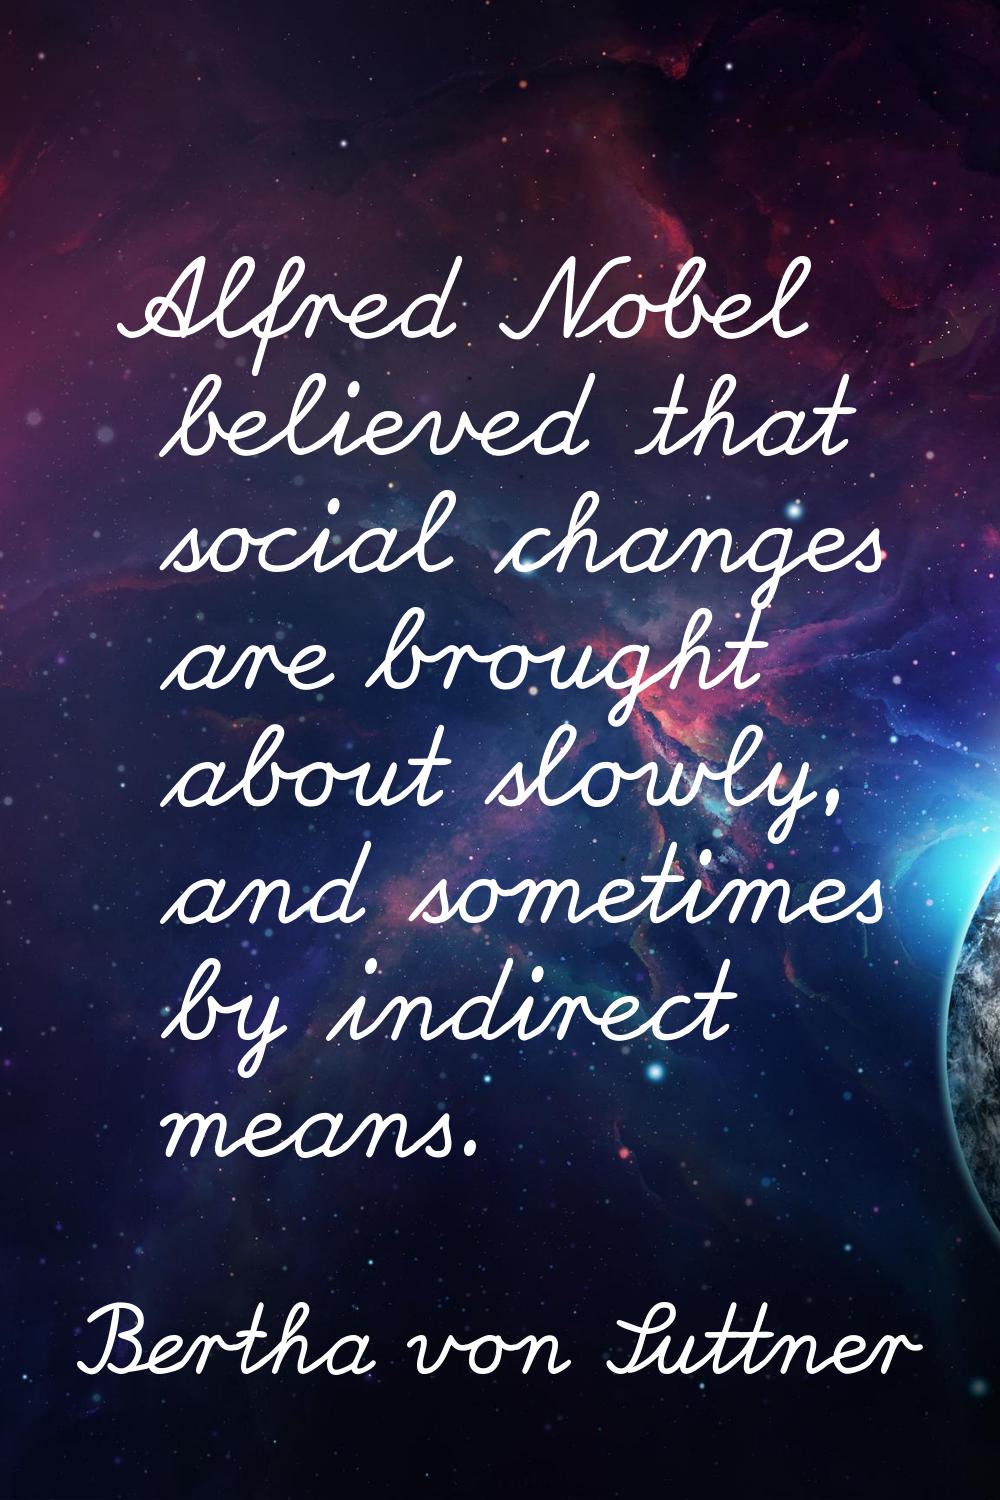 Alfred Nobel believed that social changes are brought about slowly, and sometimes by indirect means